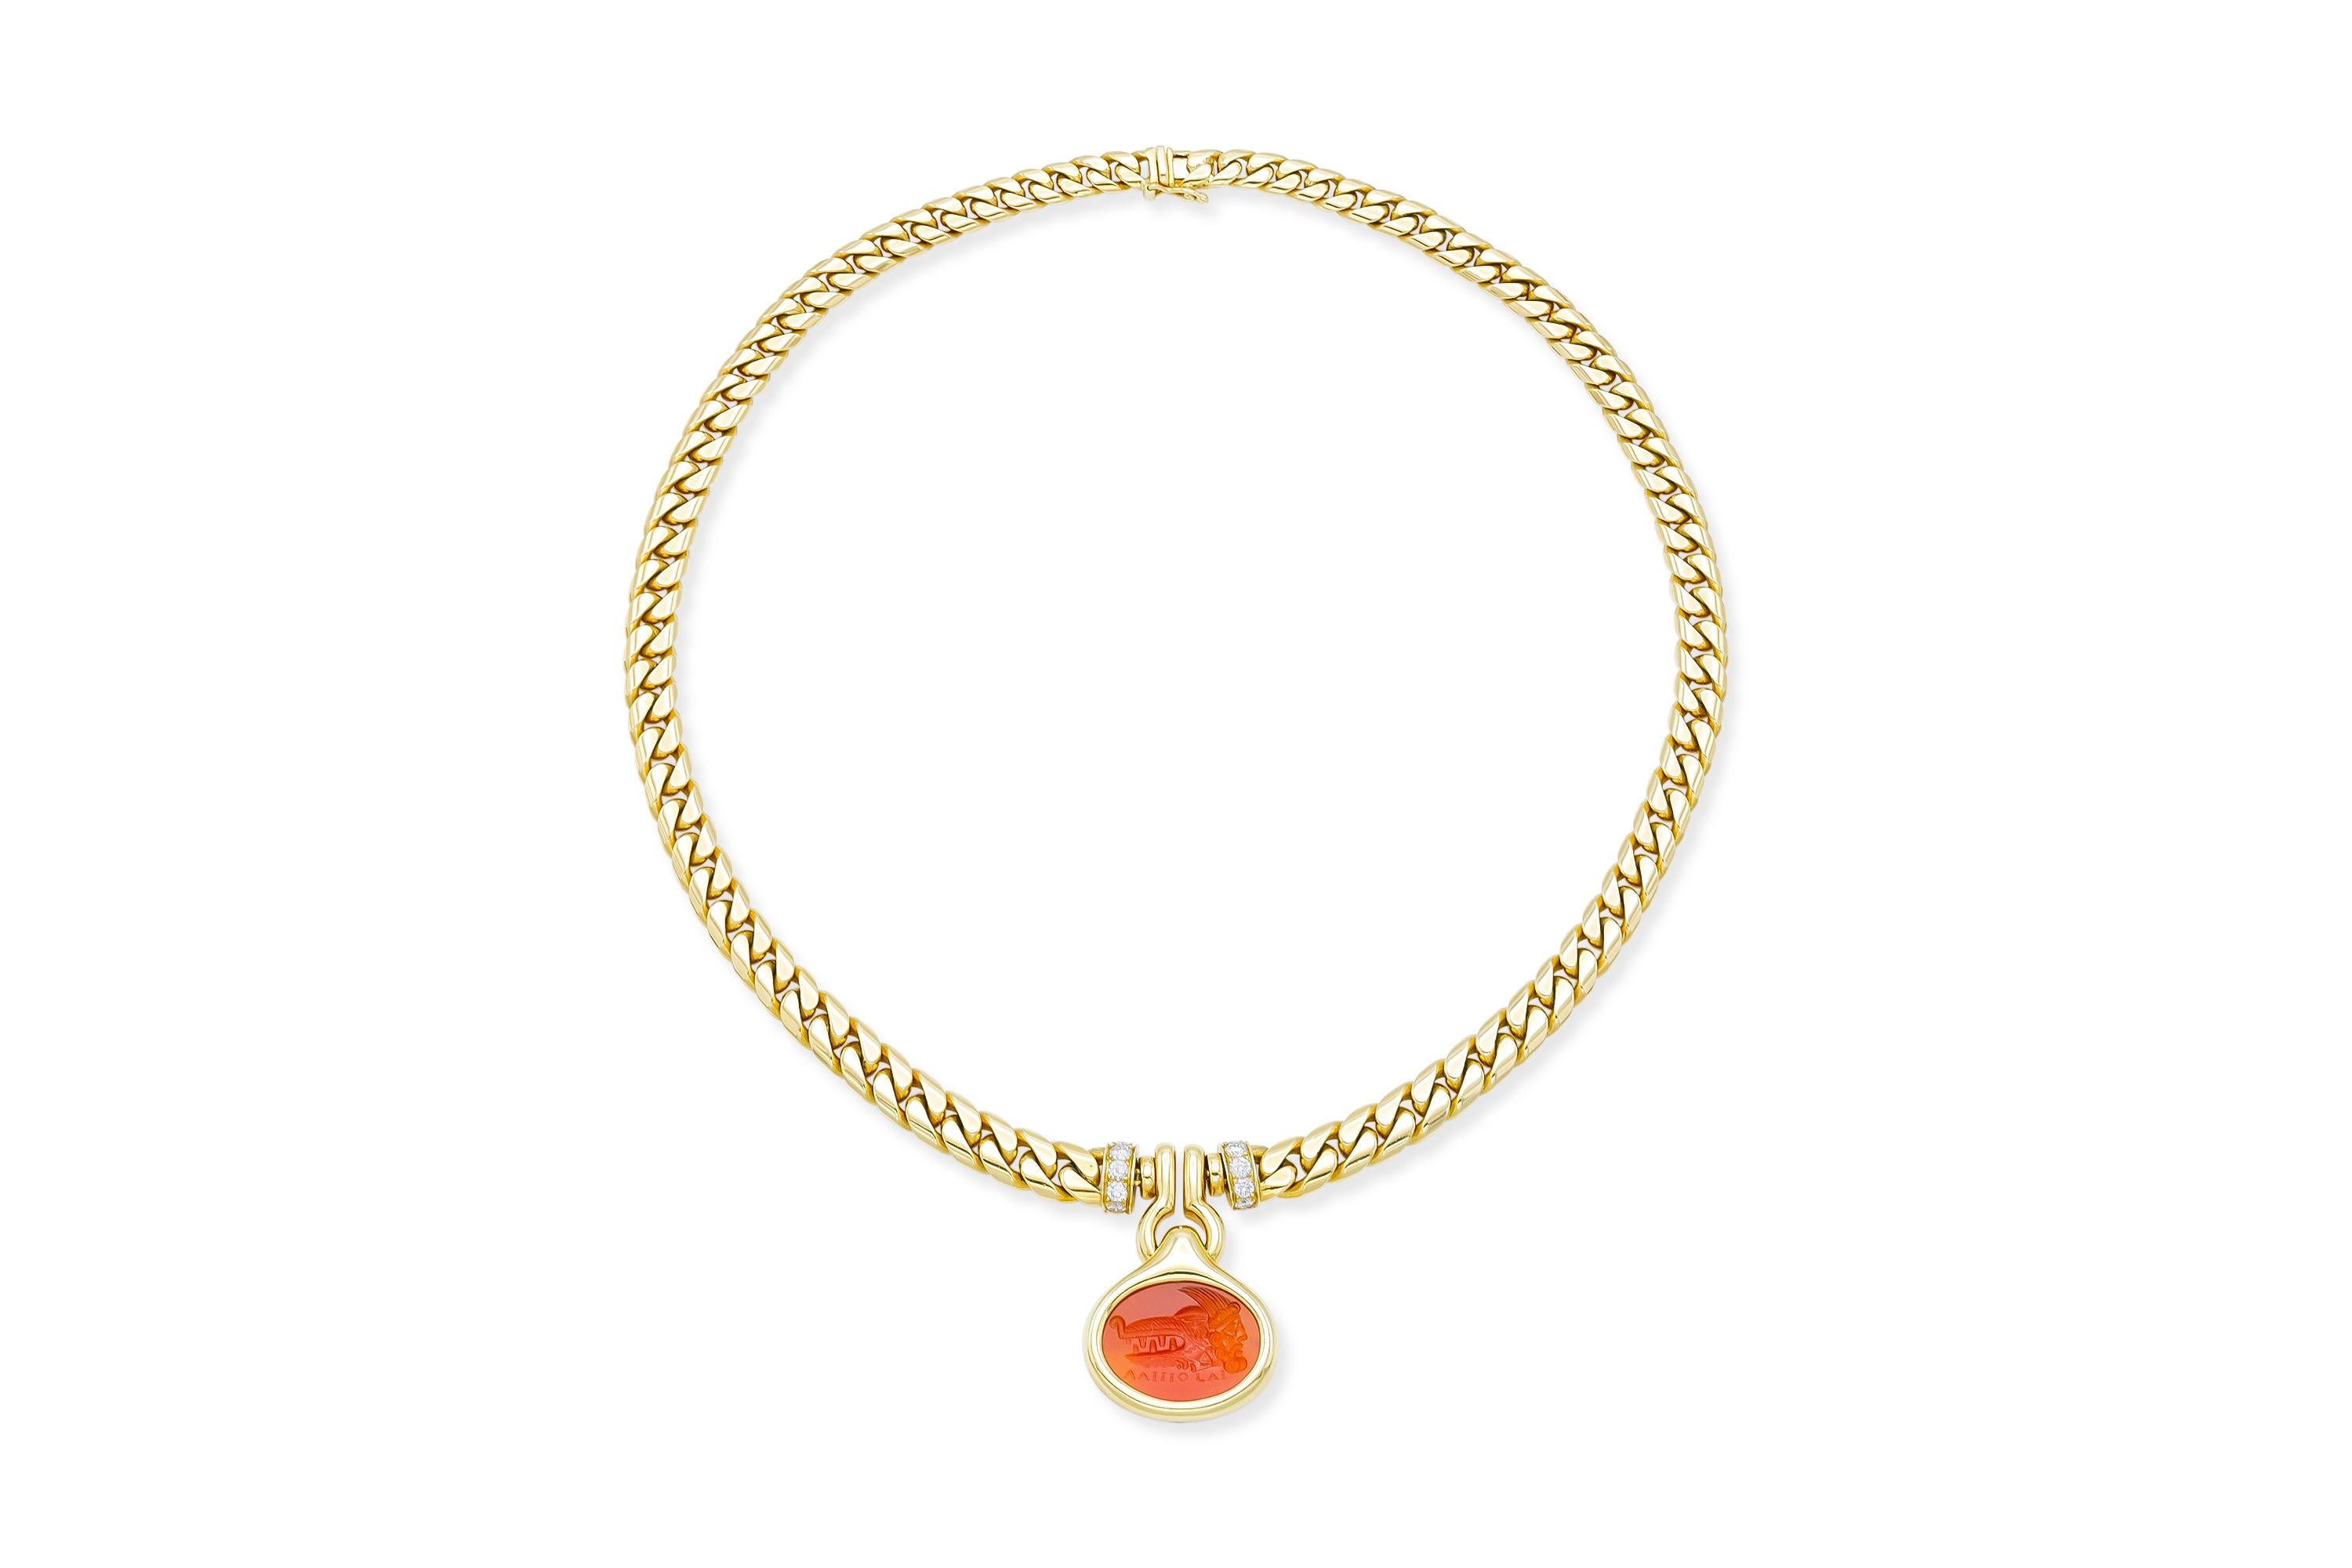 Finely crafted in 18k yellow gold with a Carnelian Intaglio from 1810.
The necklace features 10 round brilliant cut diamonds weighing approximately a total of 0.56 carats.
Signed by Bvlgari
Circa 1970s